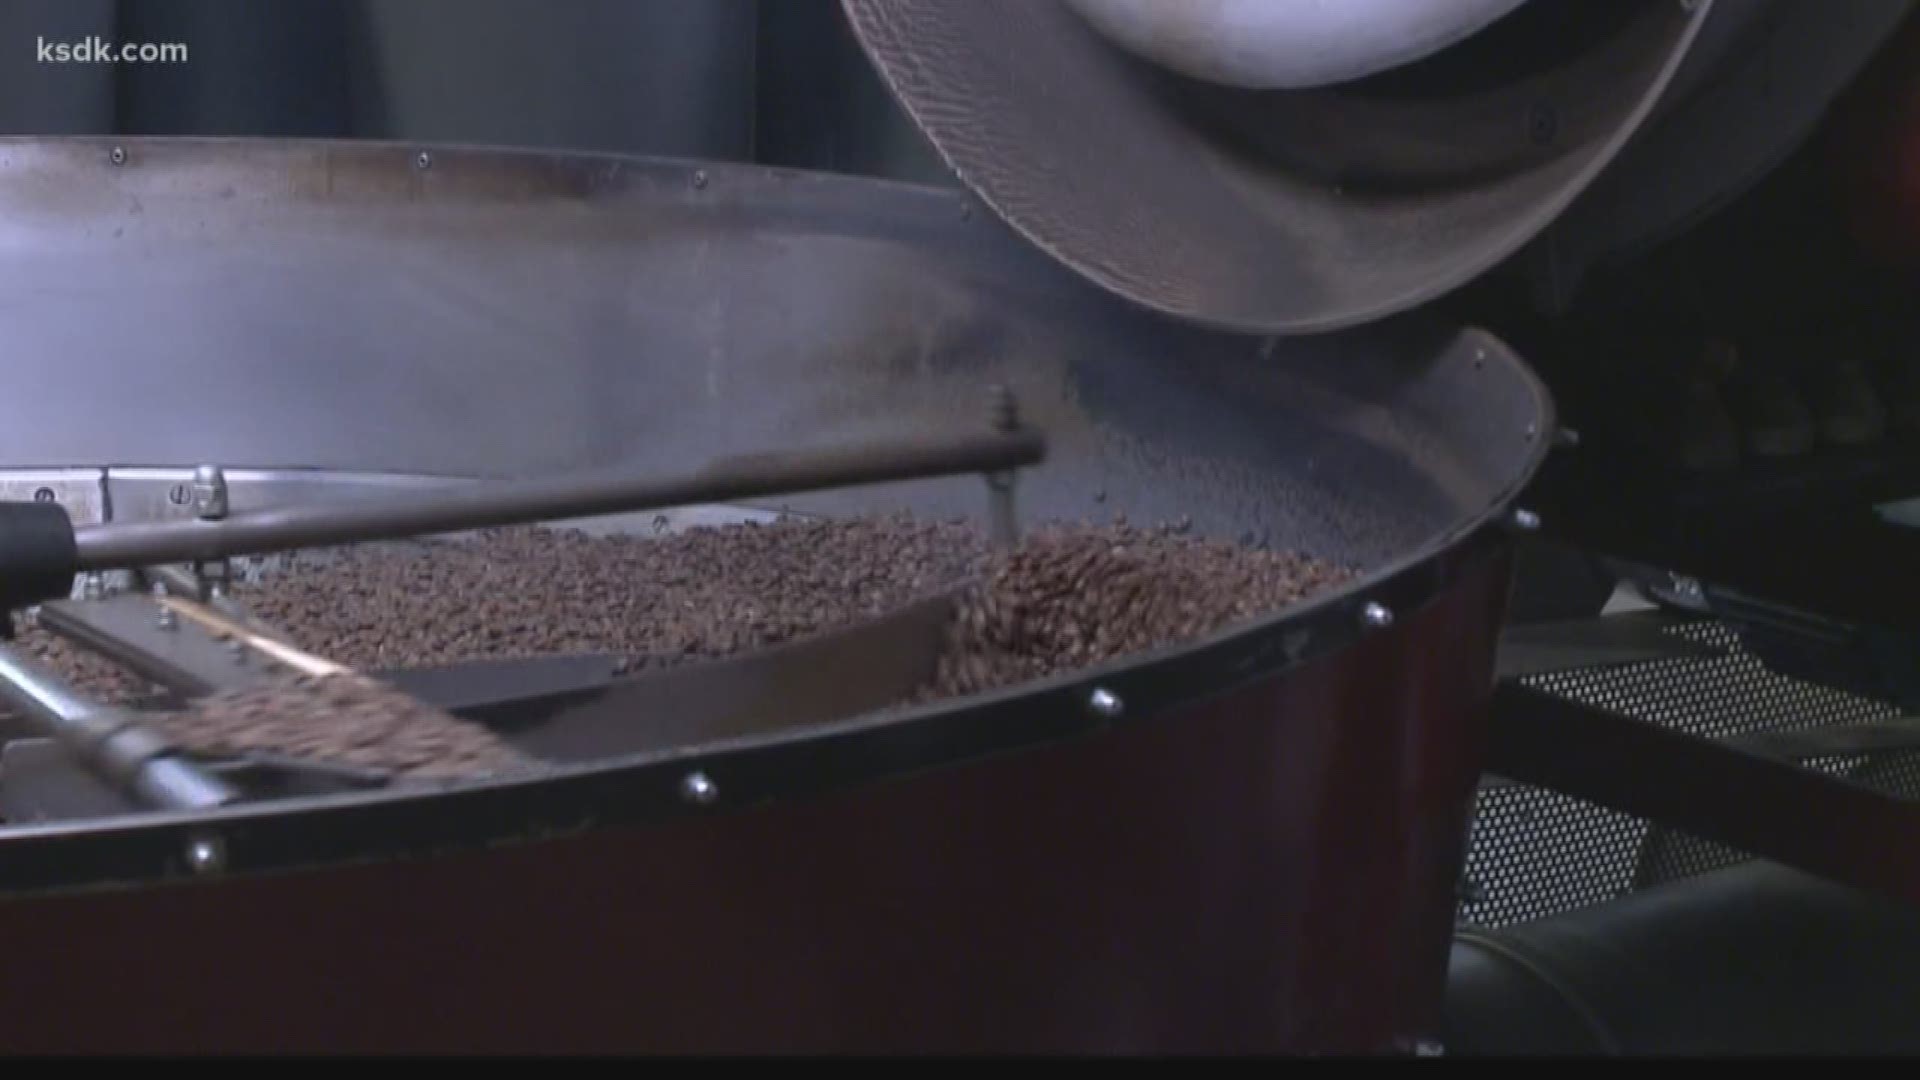 Kaldi’s Coffee has set a goal to raise $25,000 by selling 25,000 bags of the blend.